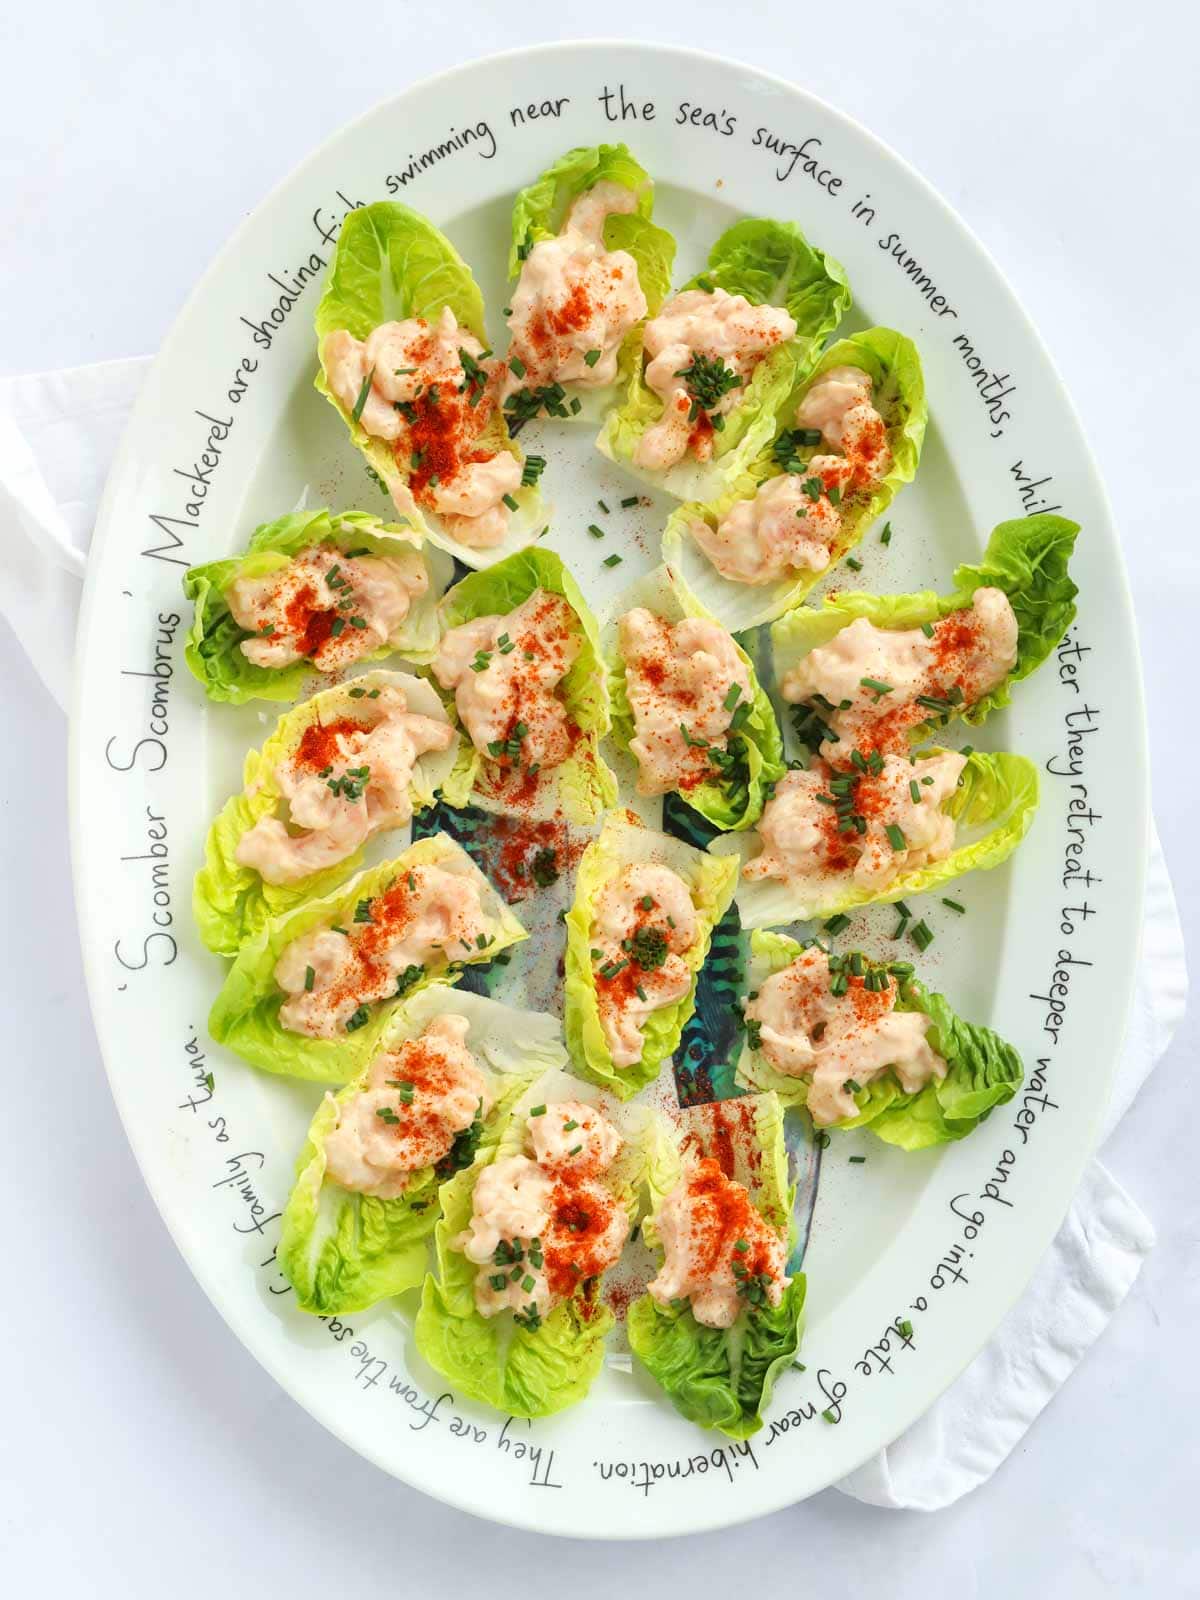 A large platter filled with prawn cocktail canapés on a bed of little gem lettuce leaf cups.